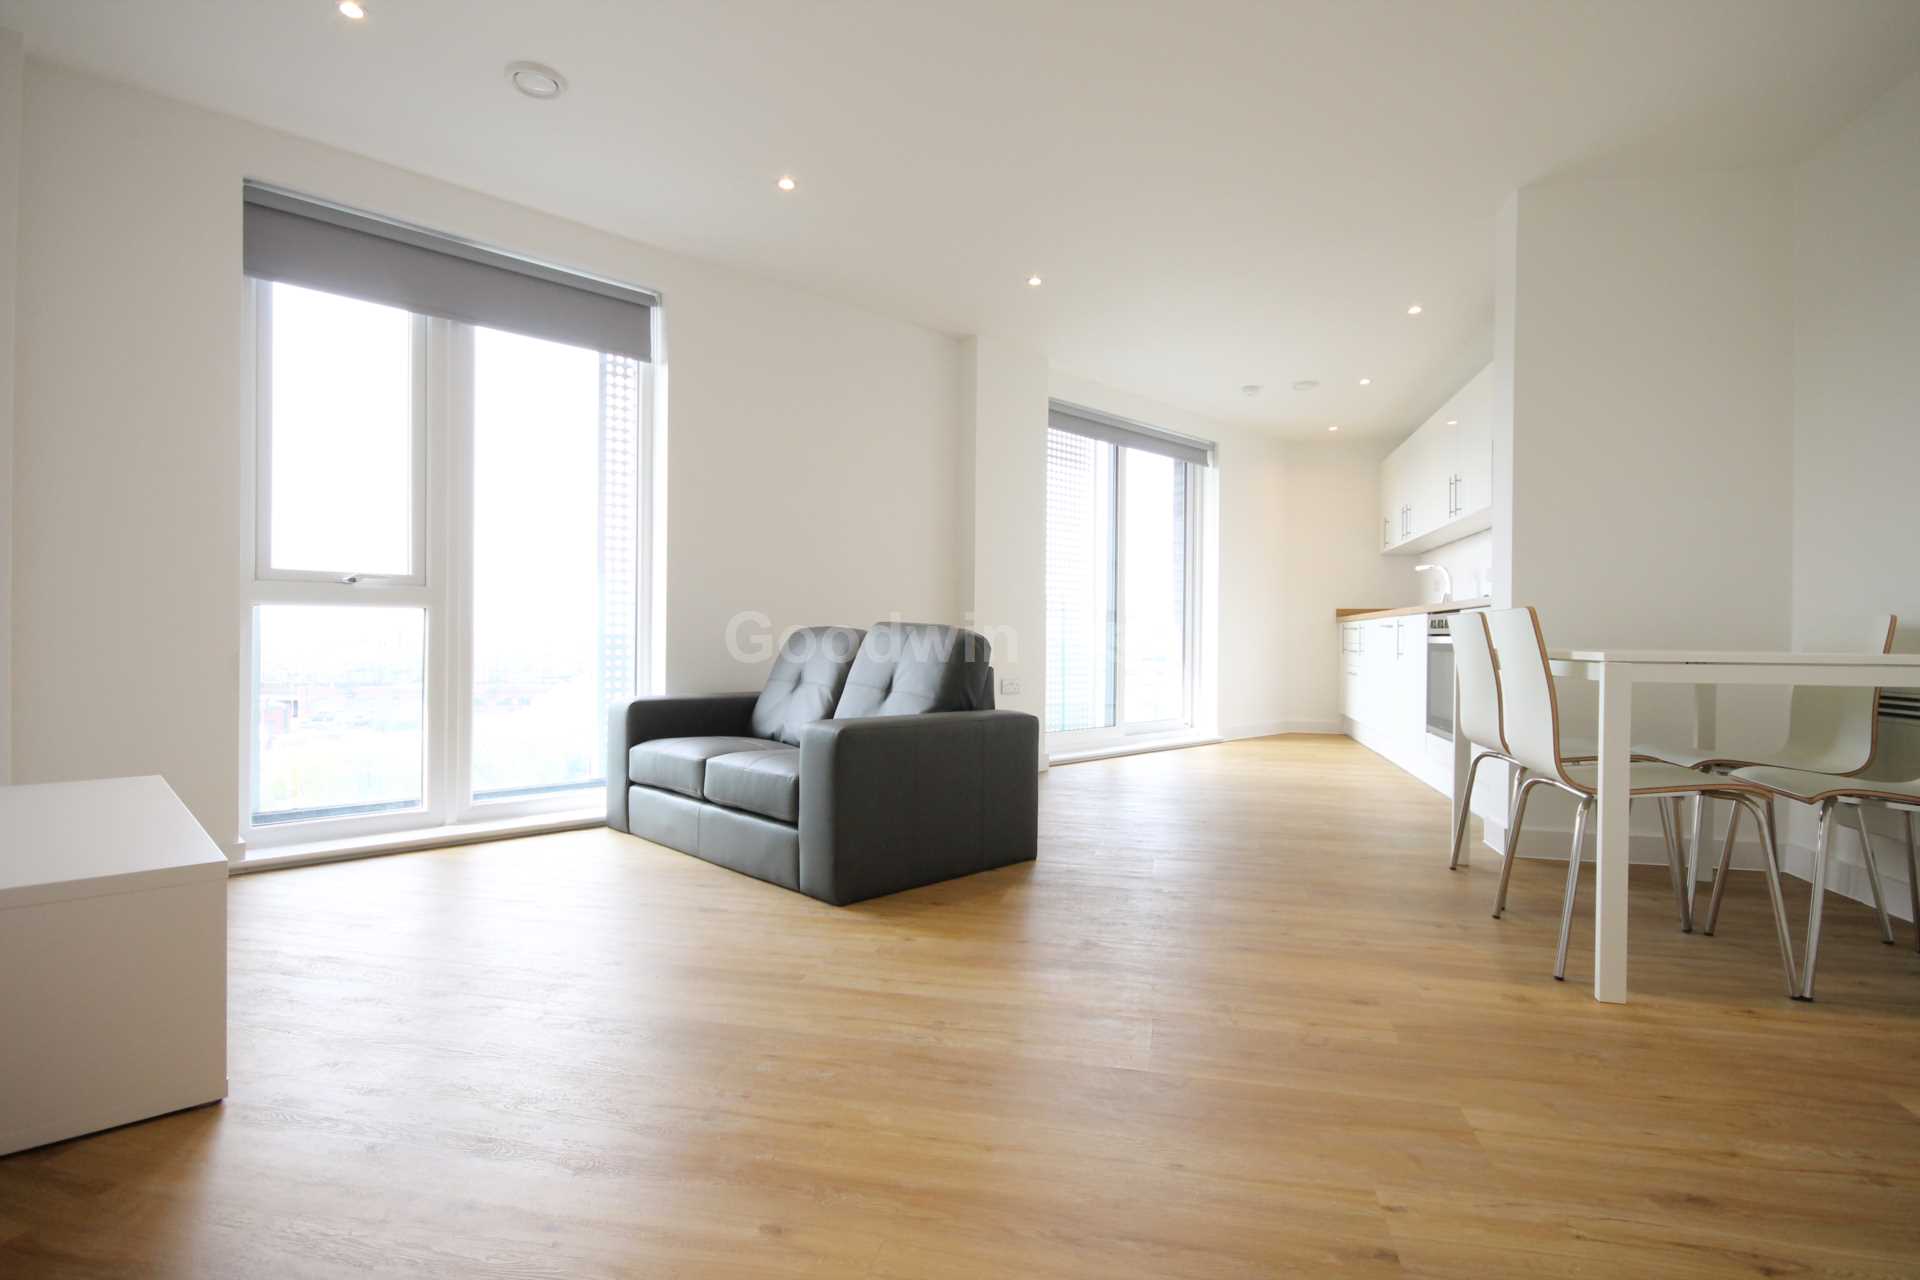 3 bed Apartment for rent in Manchester. From ubaTaeCJ